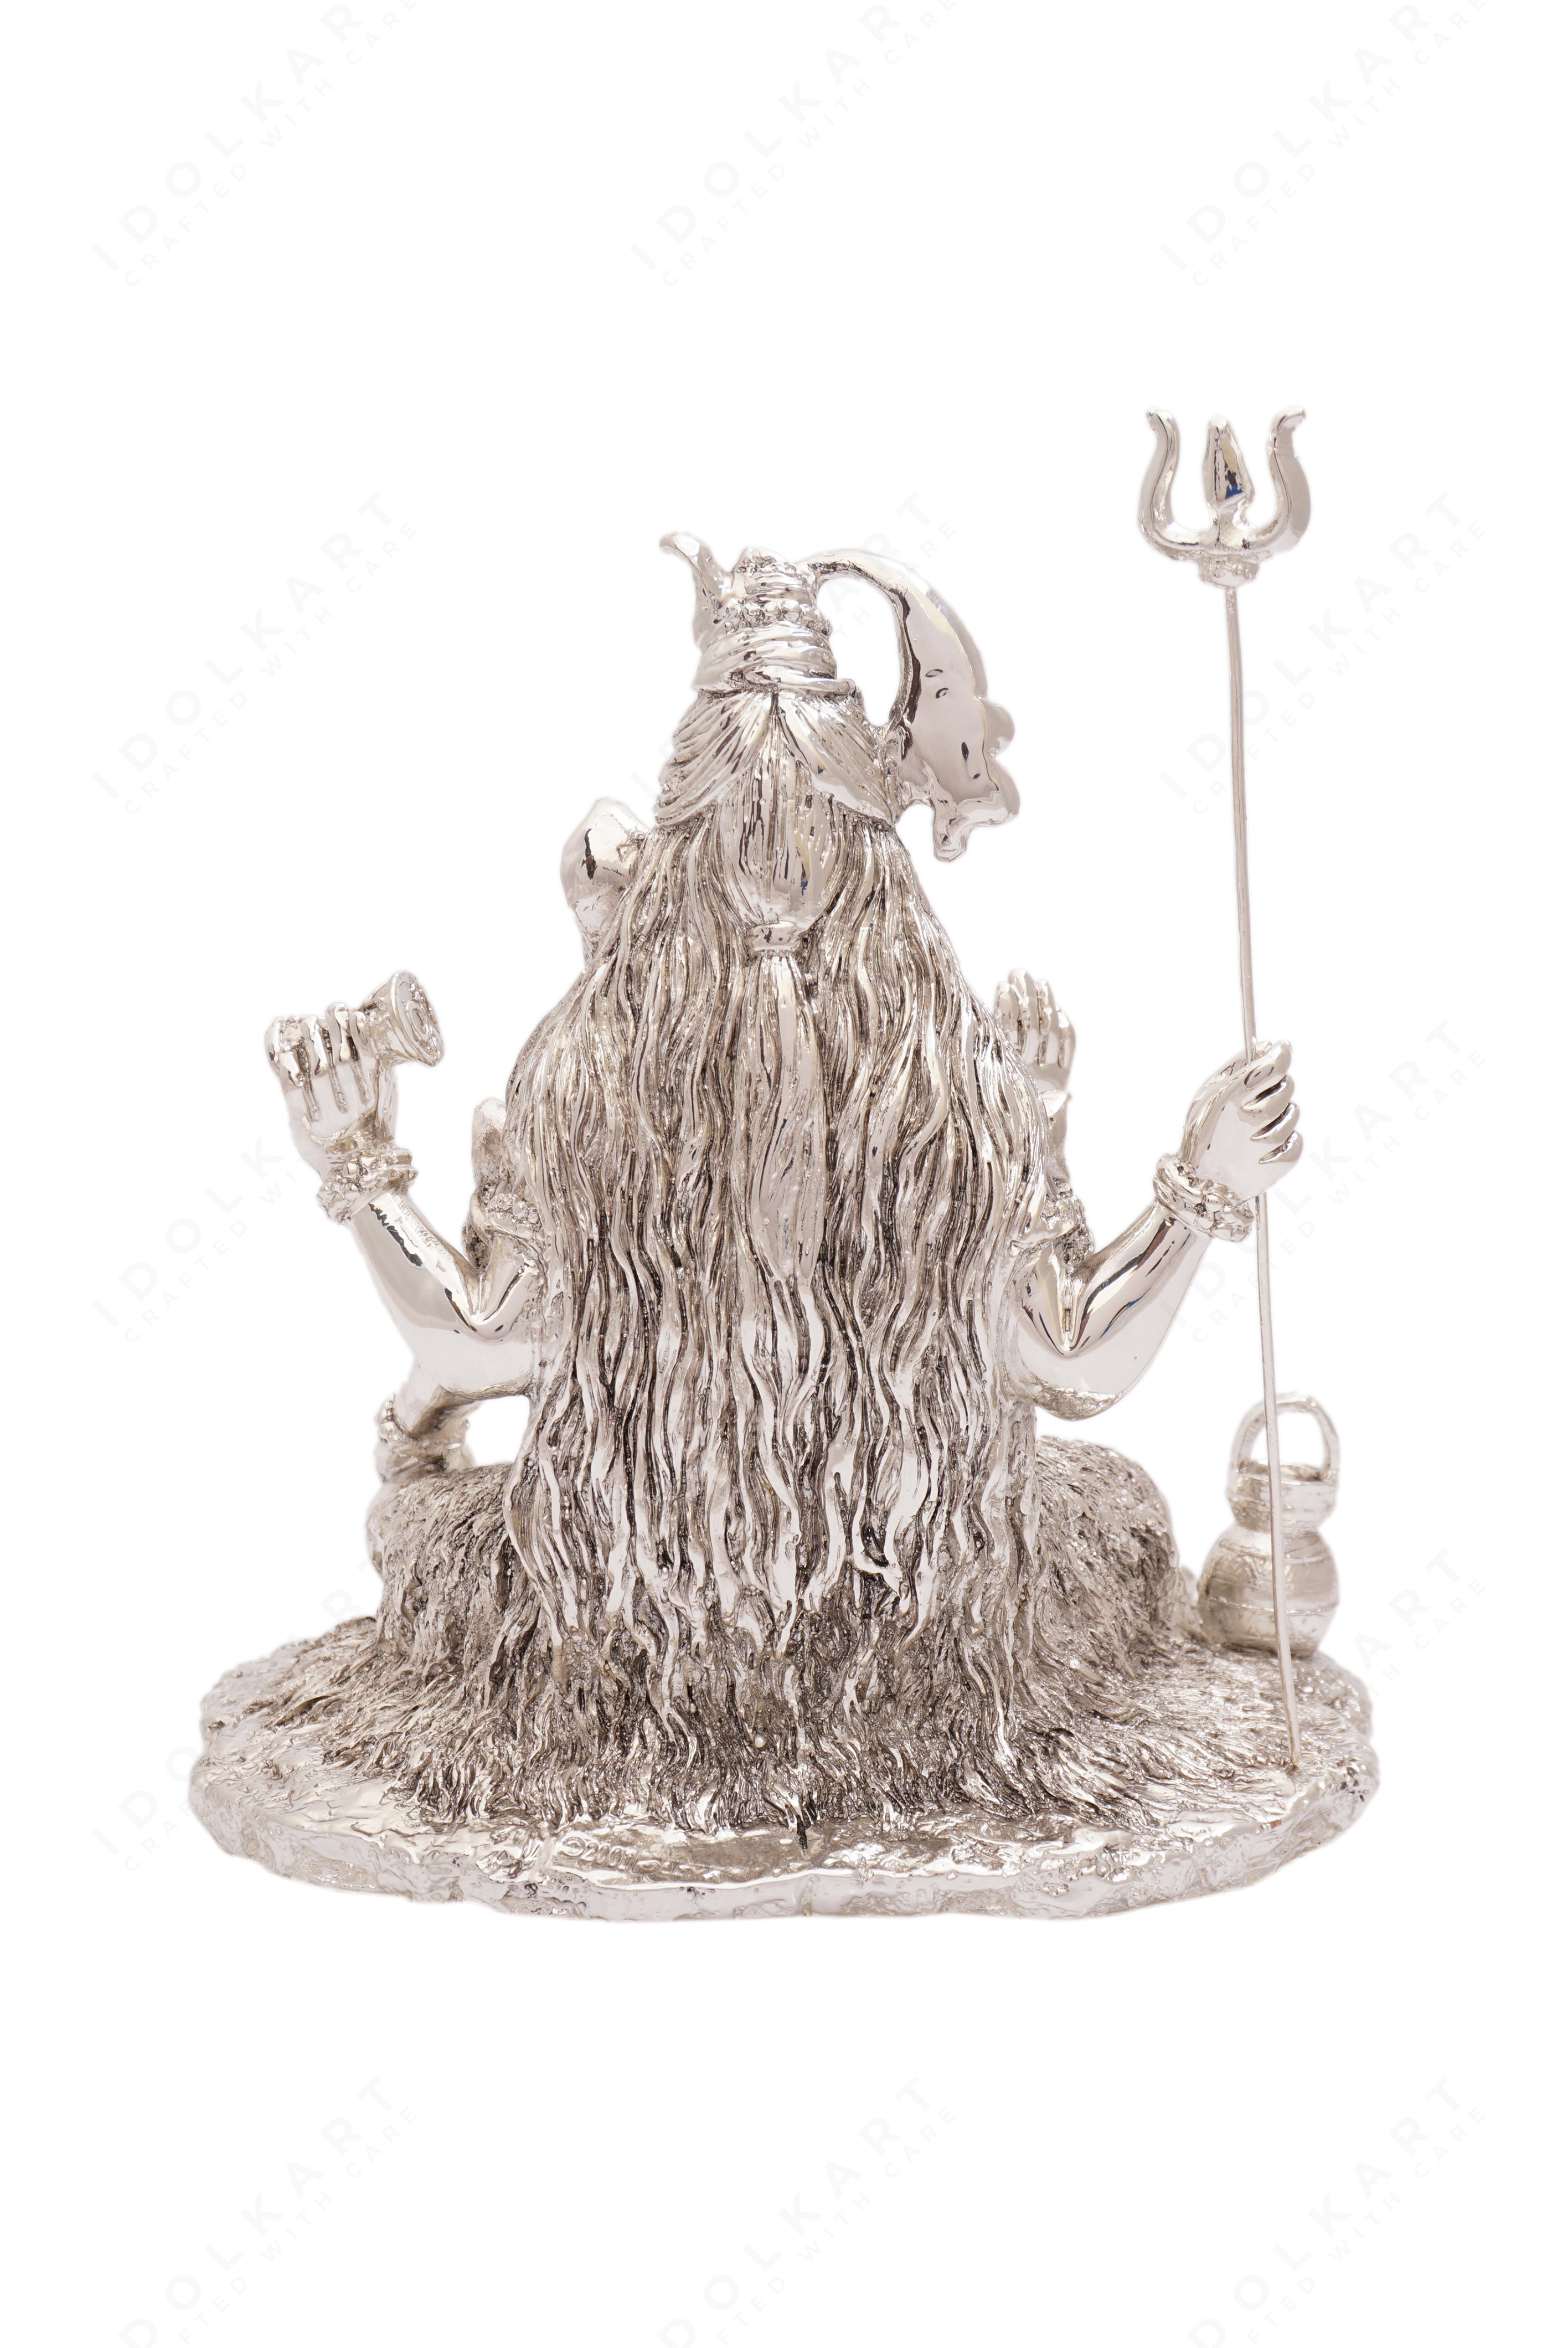 Silver Coated Antique lord shiva statue